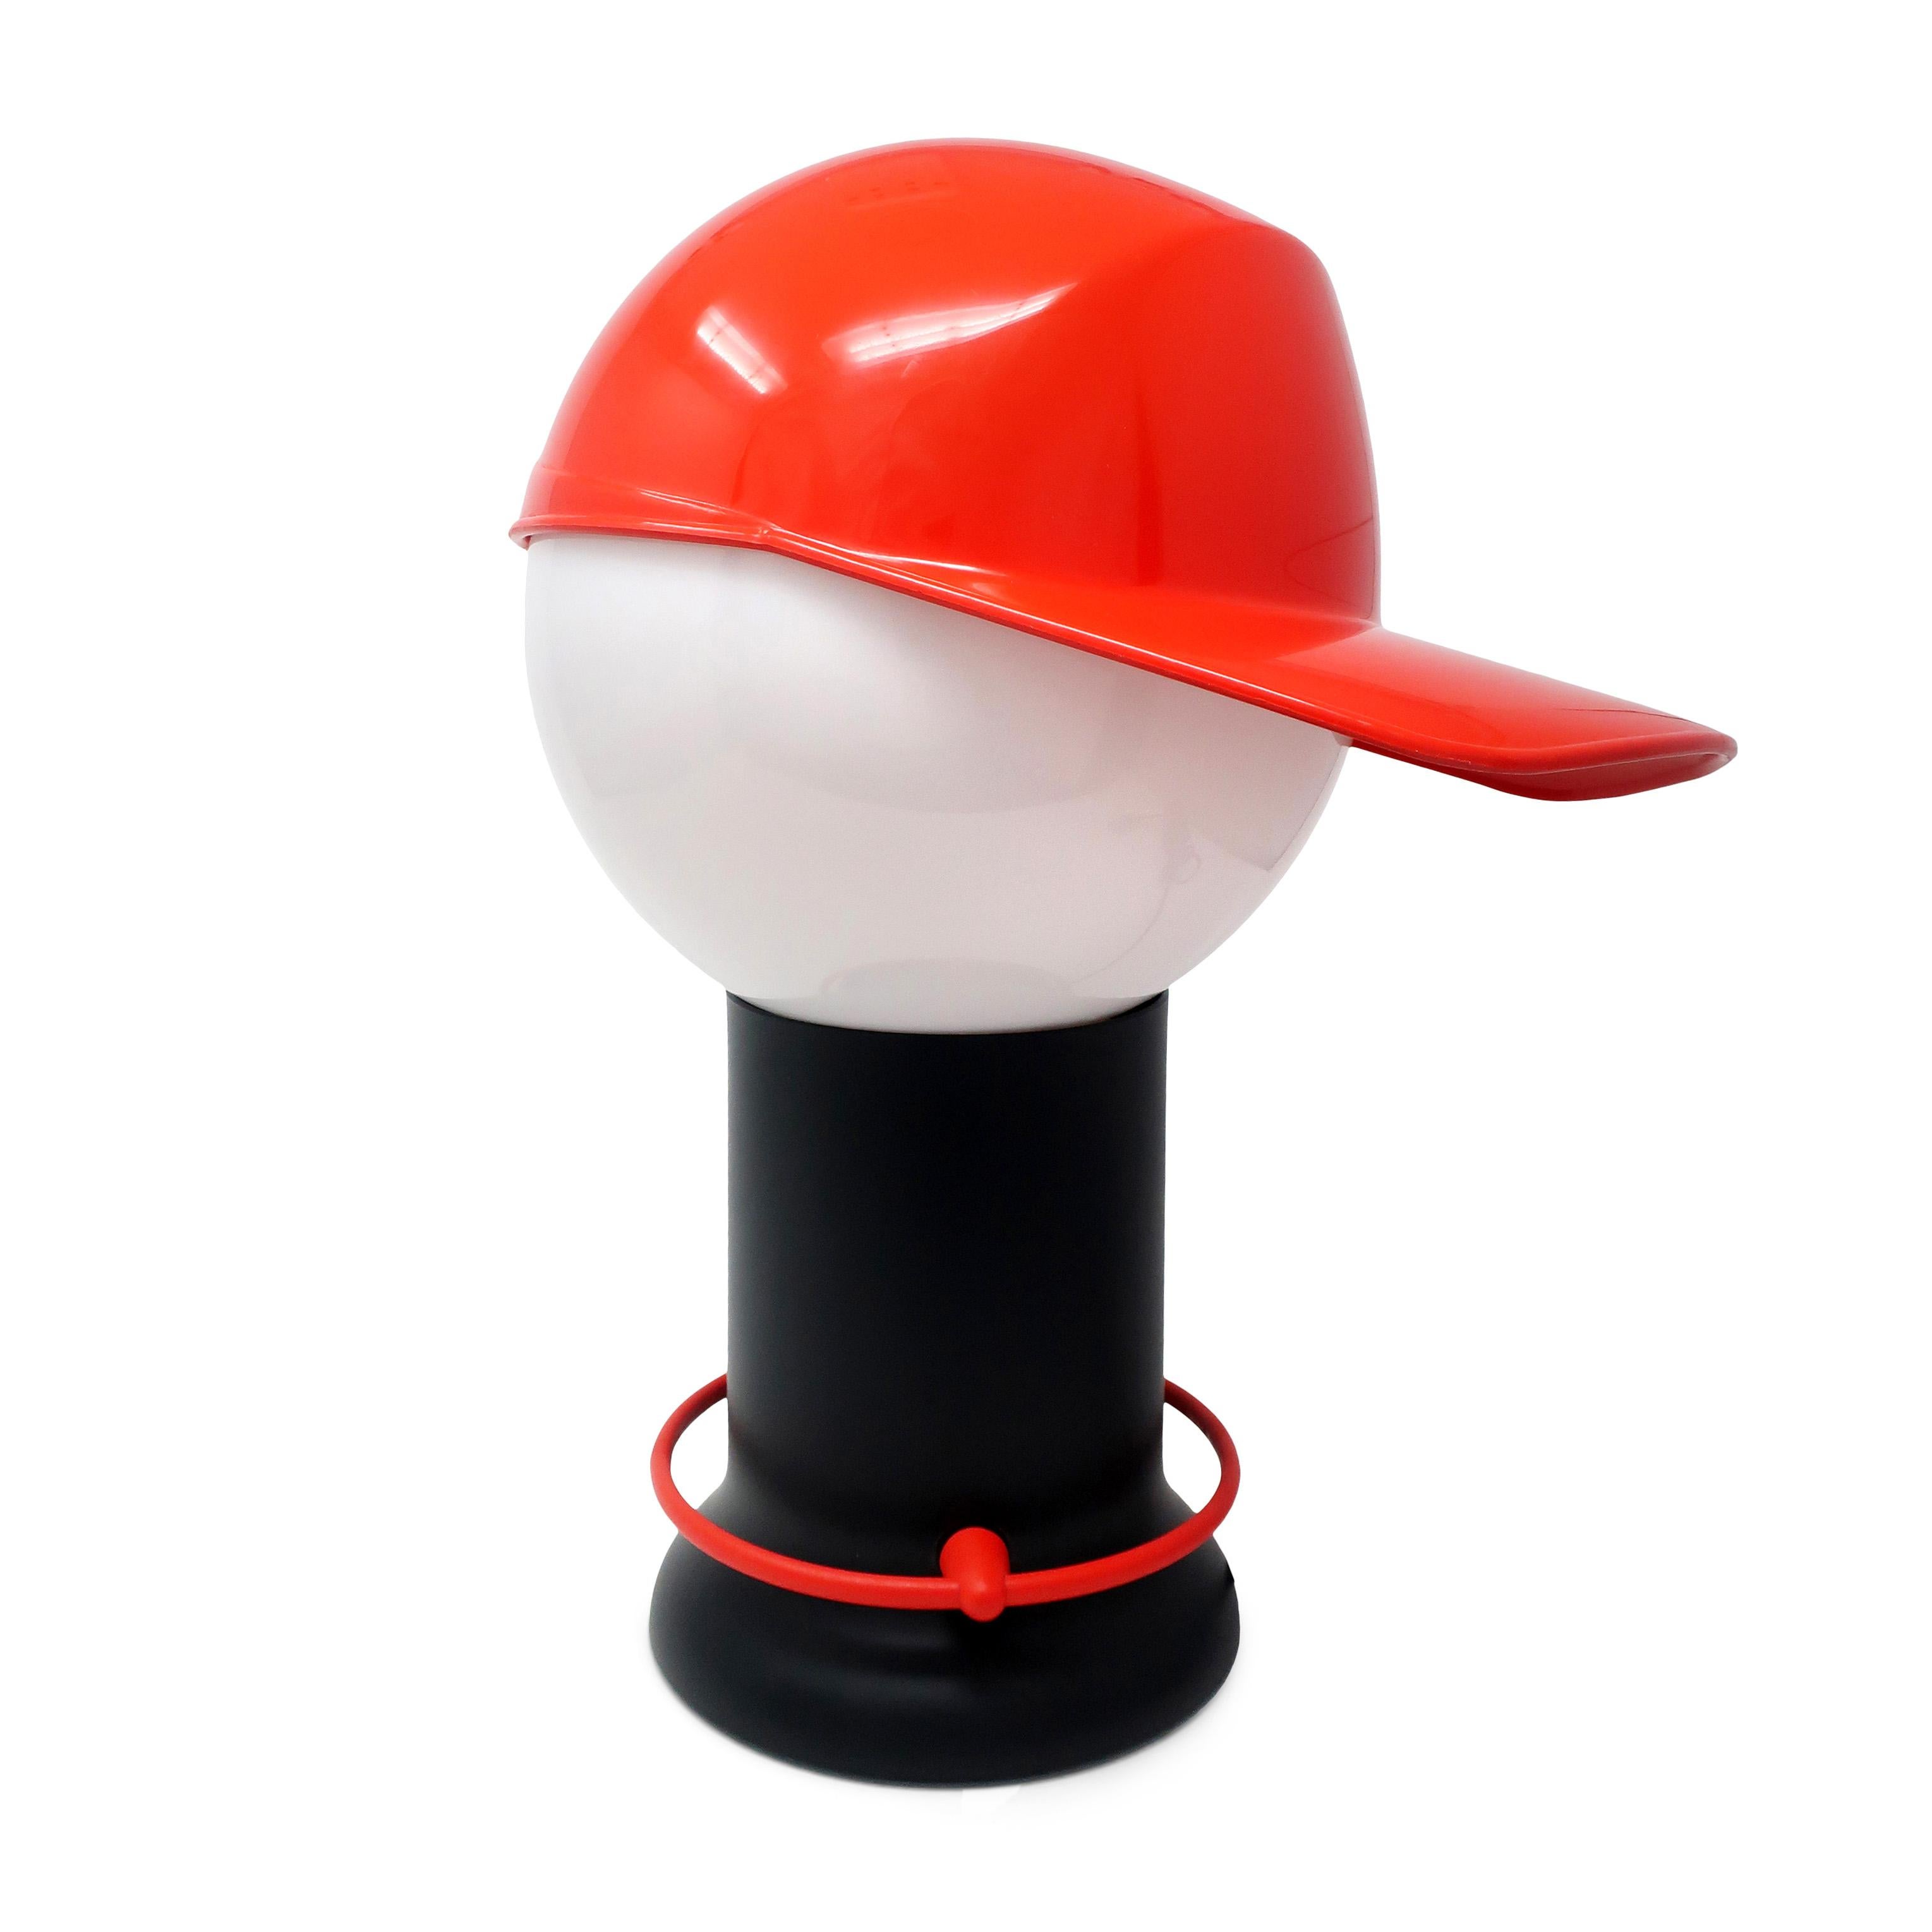 A fantastic postmodern 1980s “Cap” table lamp by Giorgetto Giugiaro for Bilumen. A red baseball hat sits on a white globe shade, which in turn sits on the black base. On/off switch is a red plastic circle around the base that pivots when pressed to